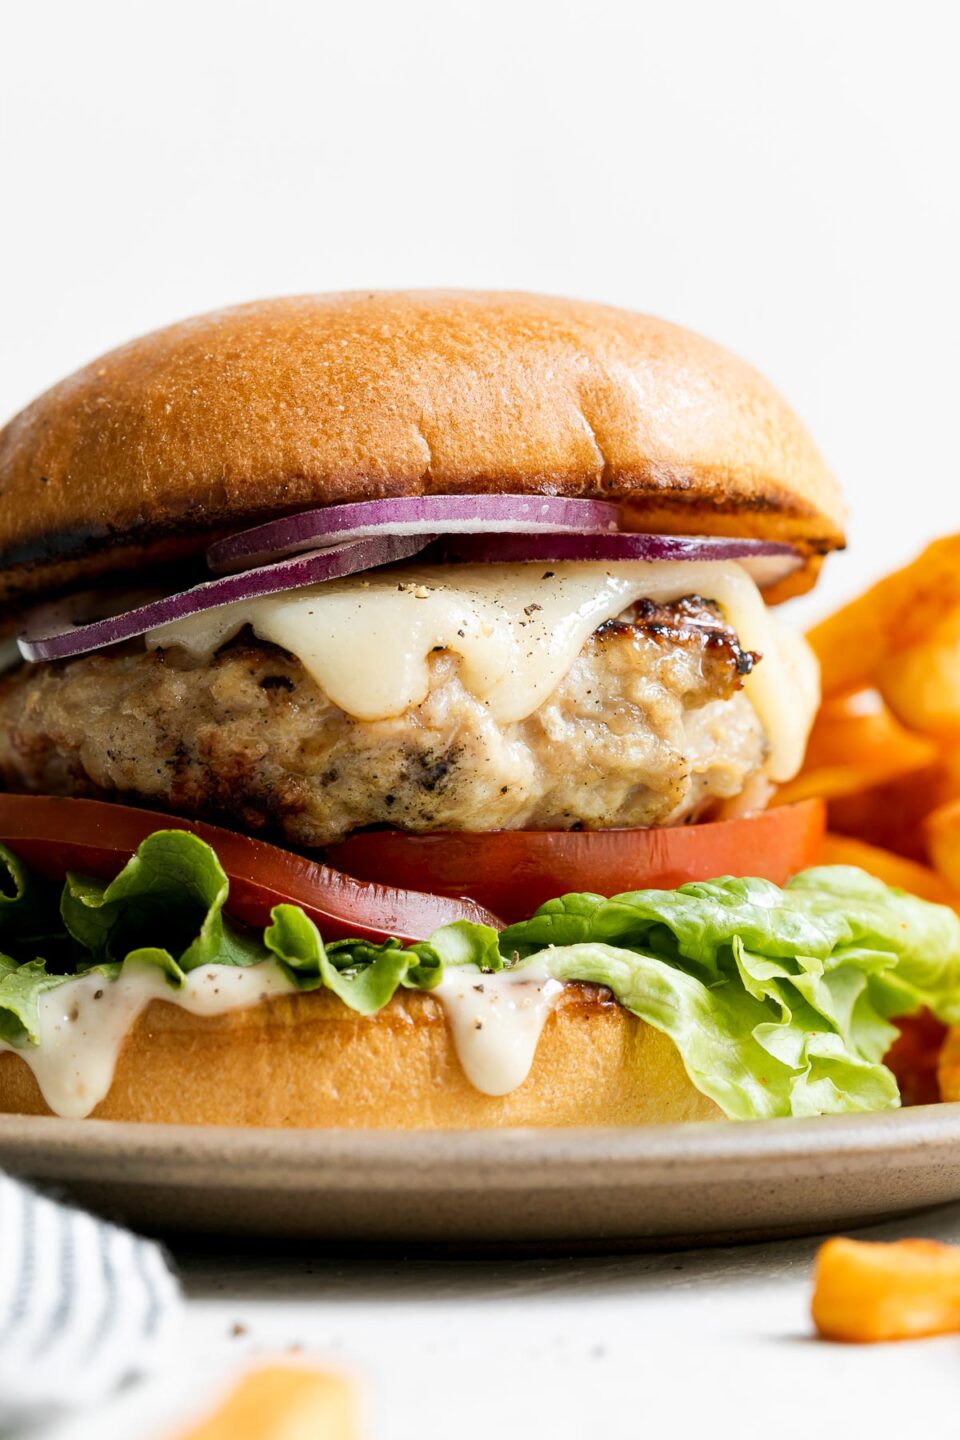 A single grilled chicken burger is served on a small ceramic plate with french fries atop a creamy white textured surface with a blue and white striped linen napkin tucked alongside.